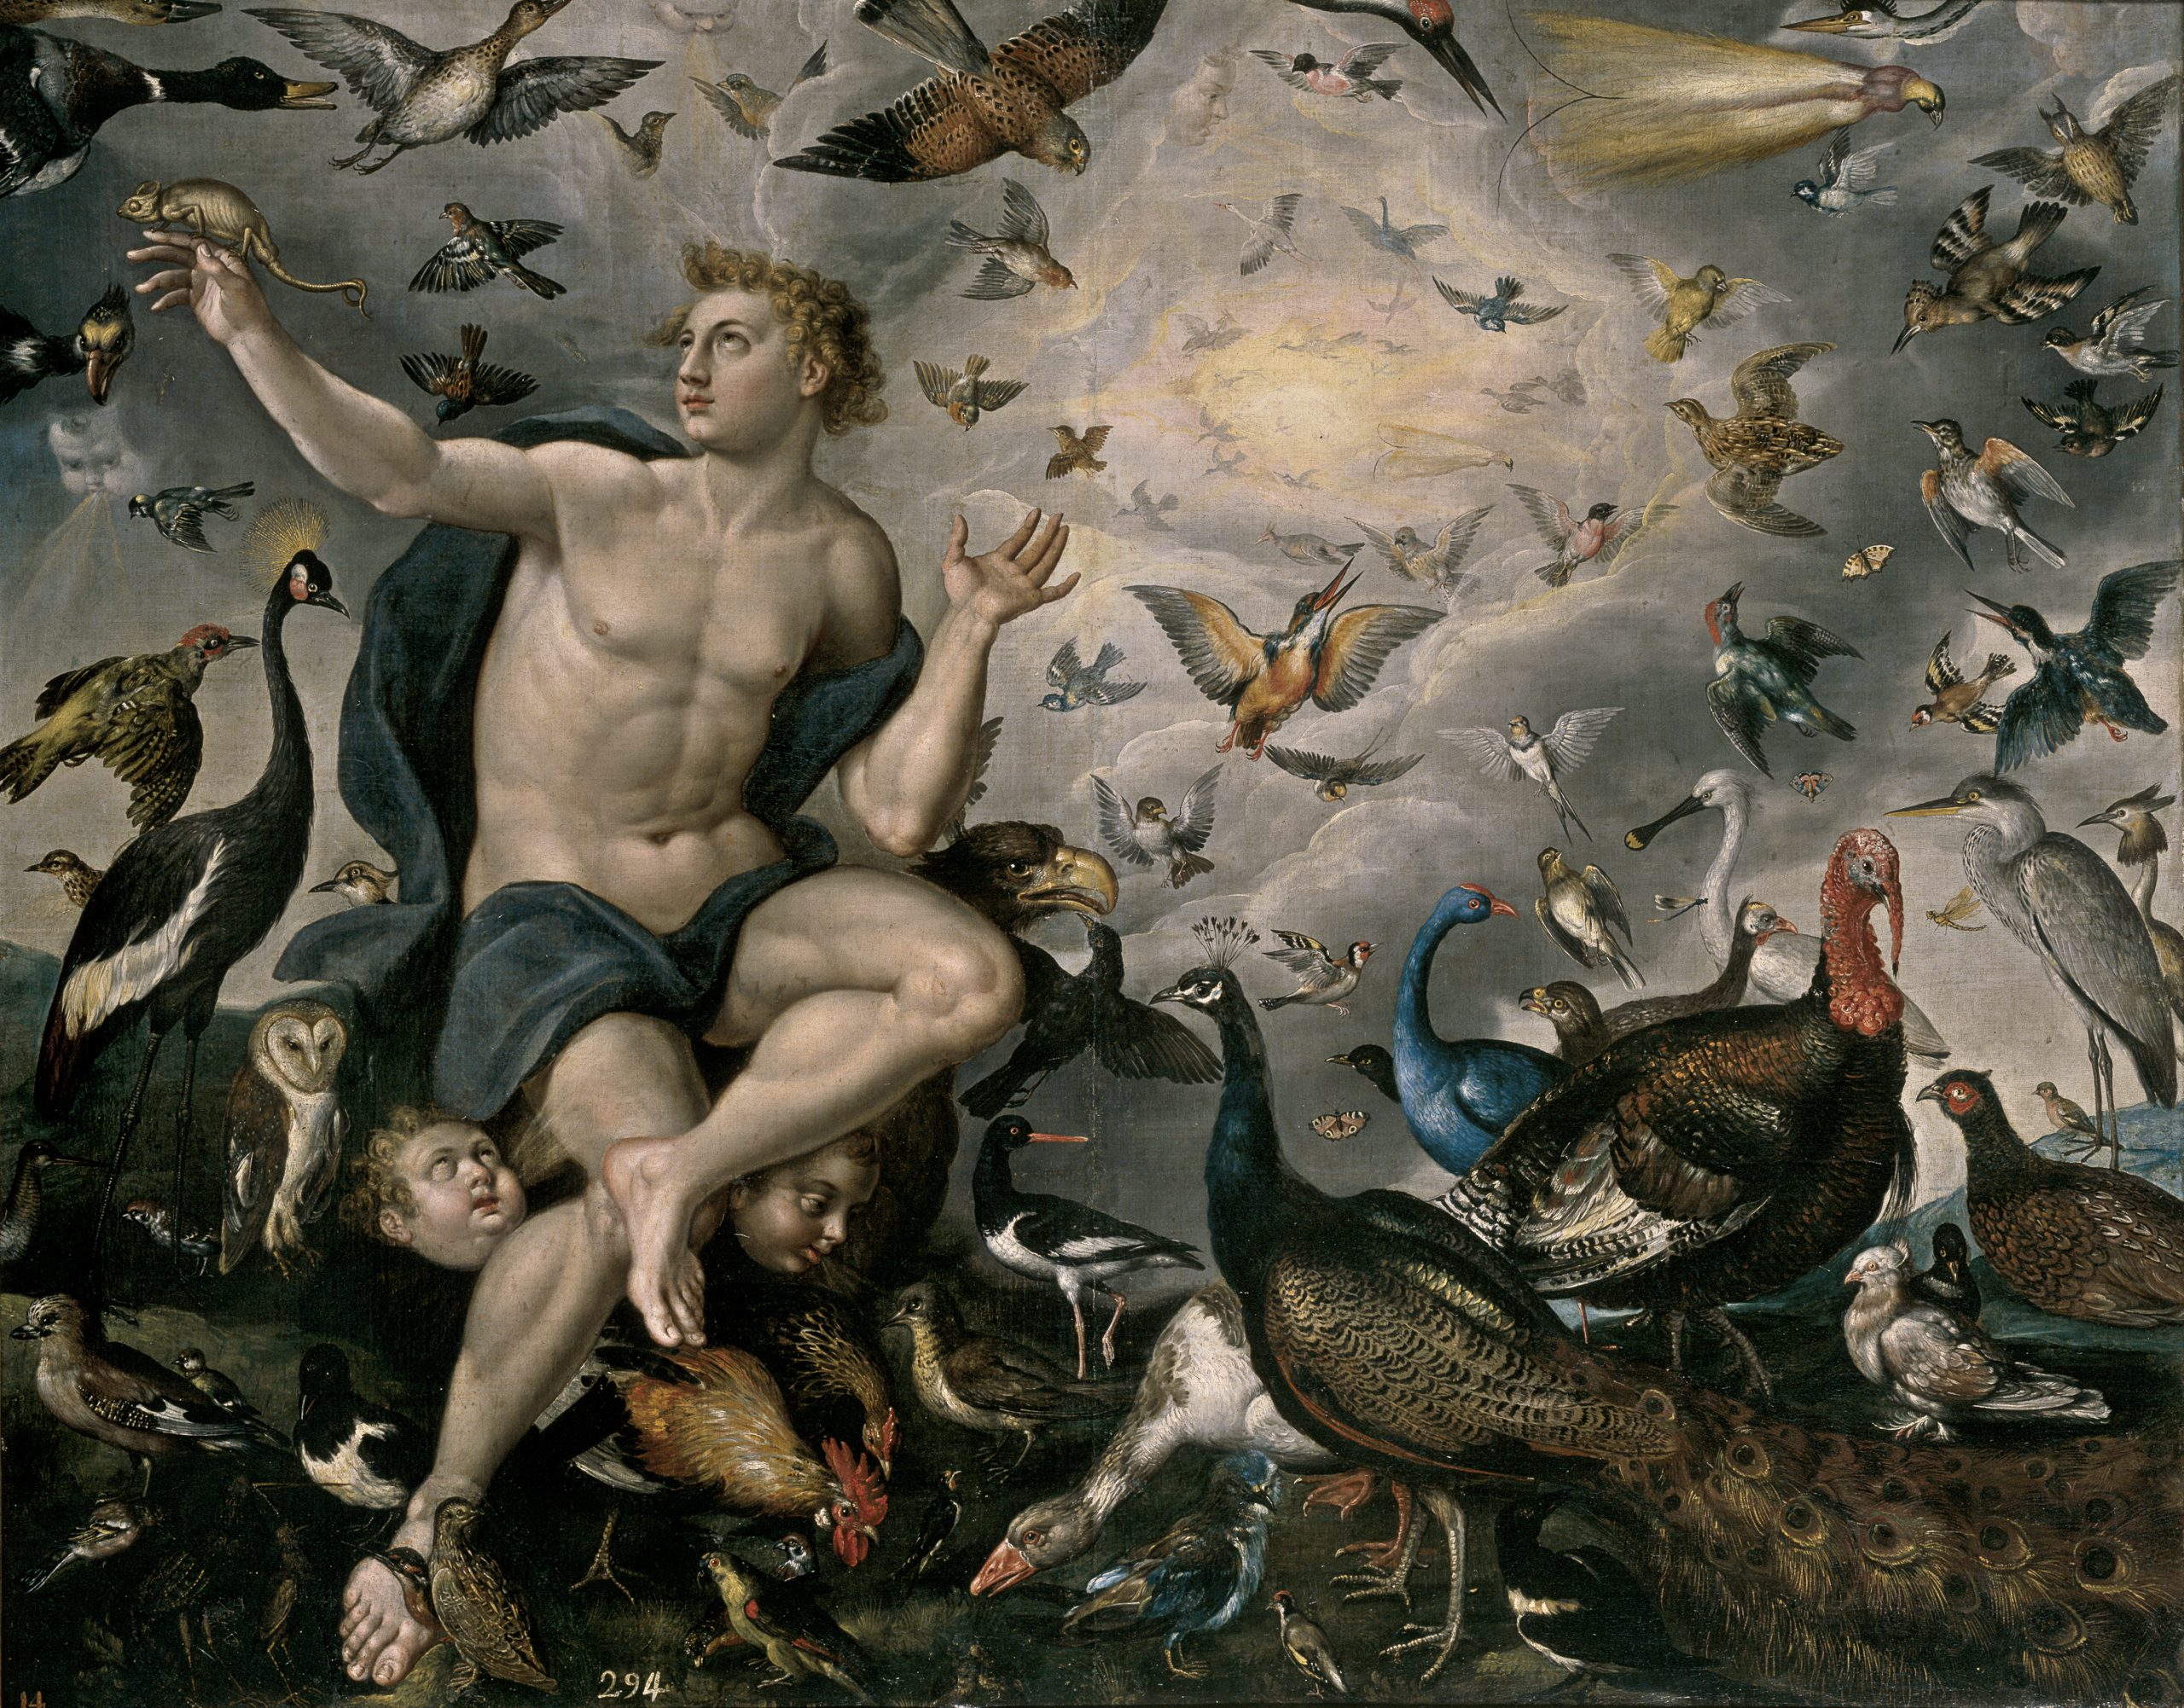 A man sits on a rock with his arms spread around him as a variety of birds in the air swarm him.